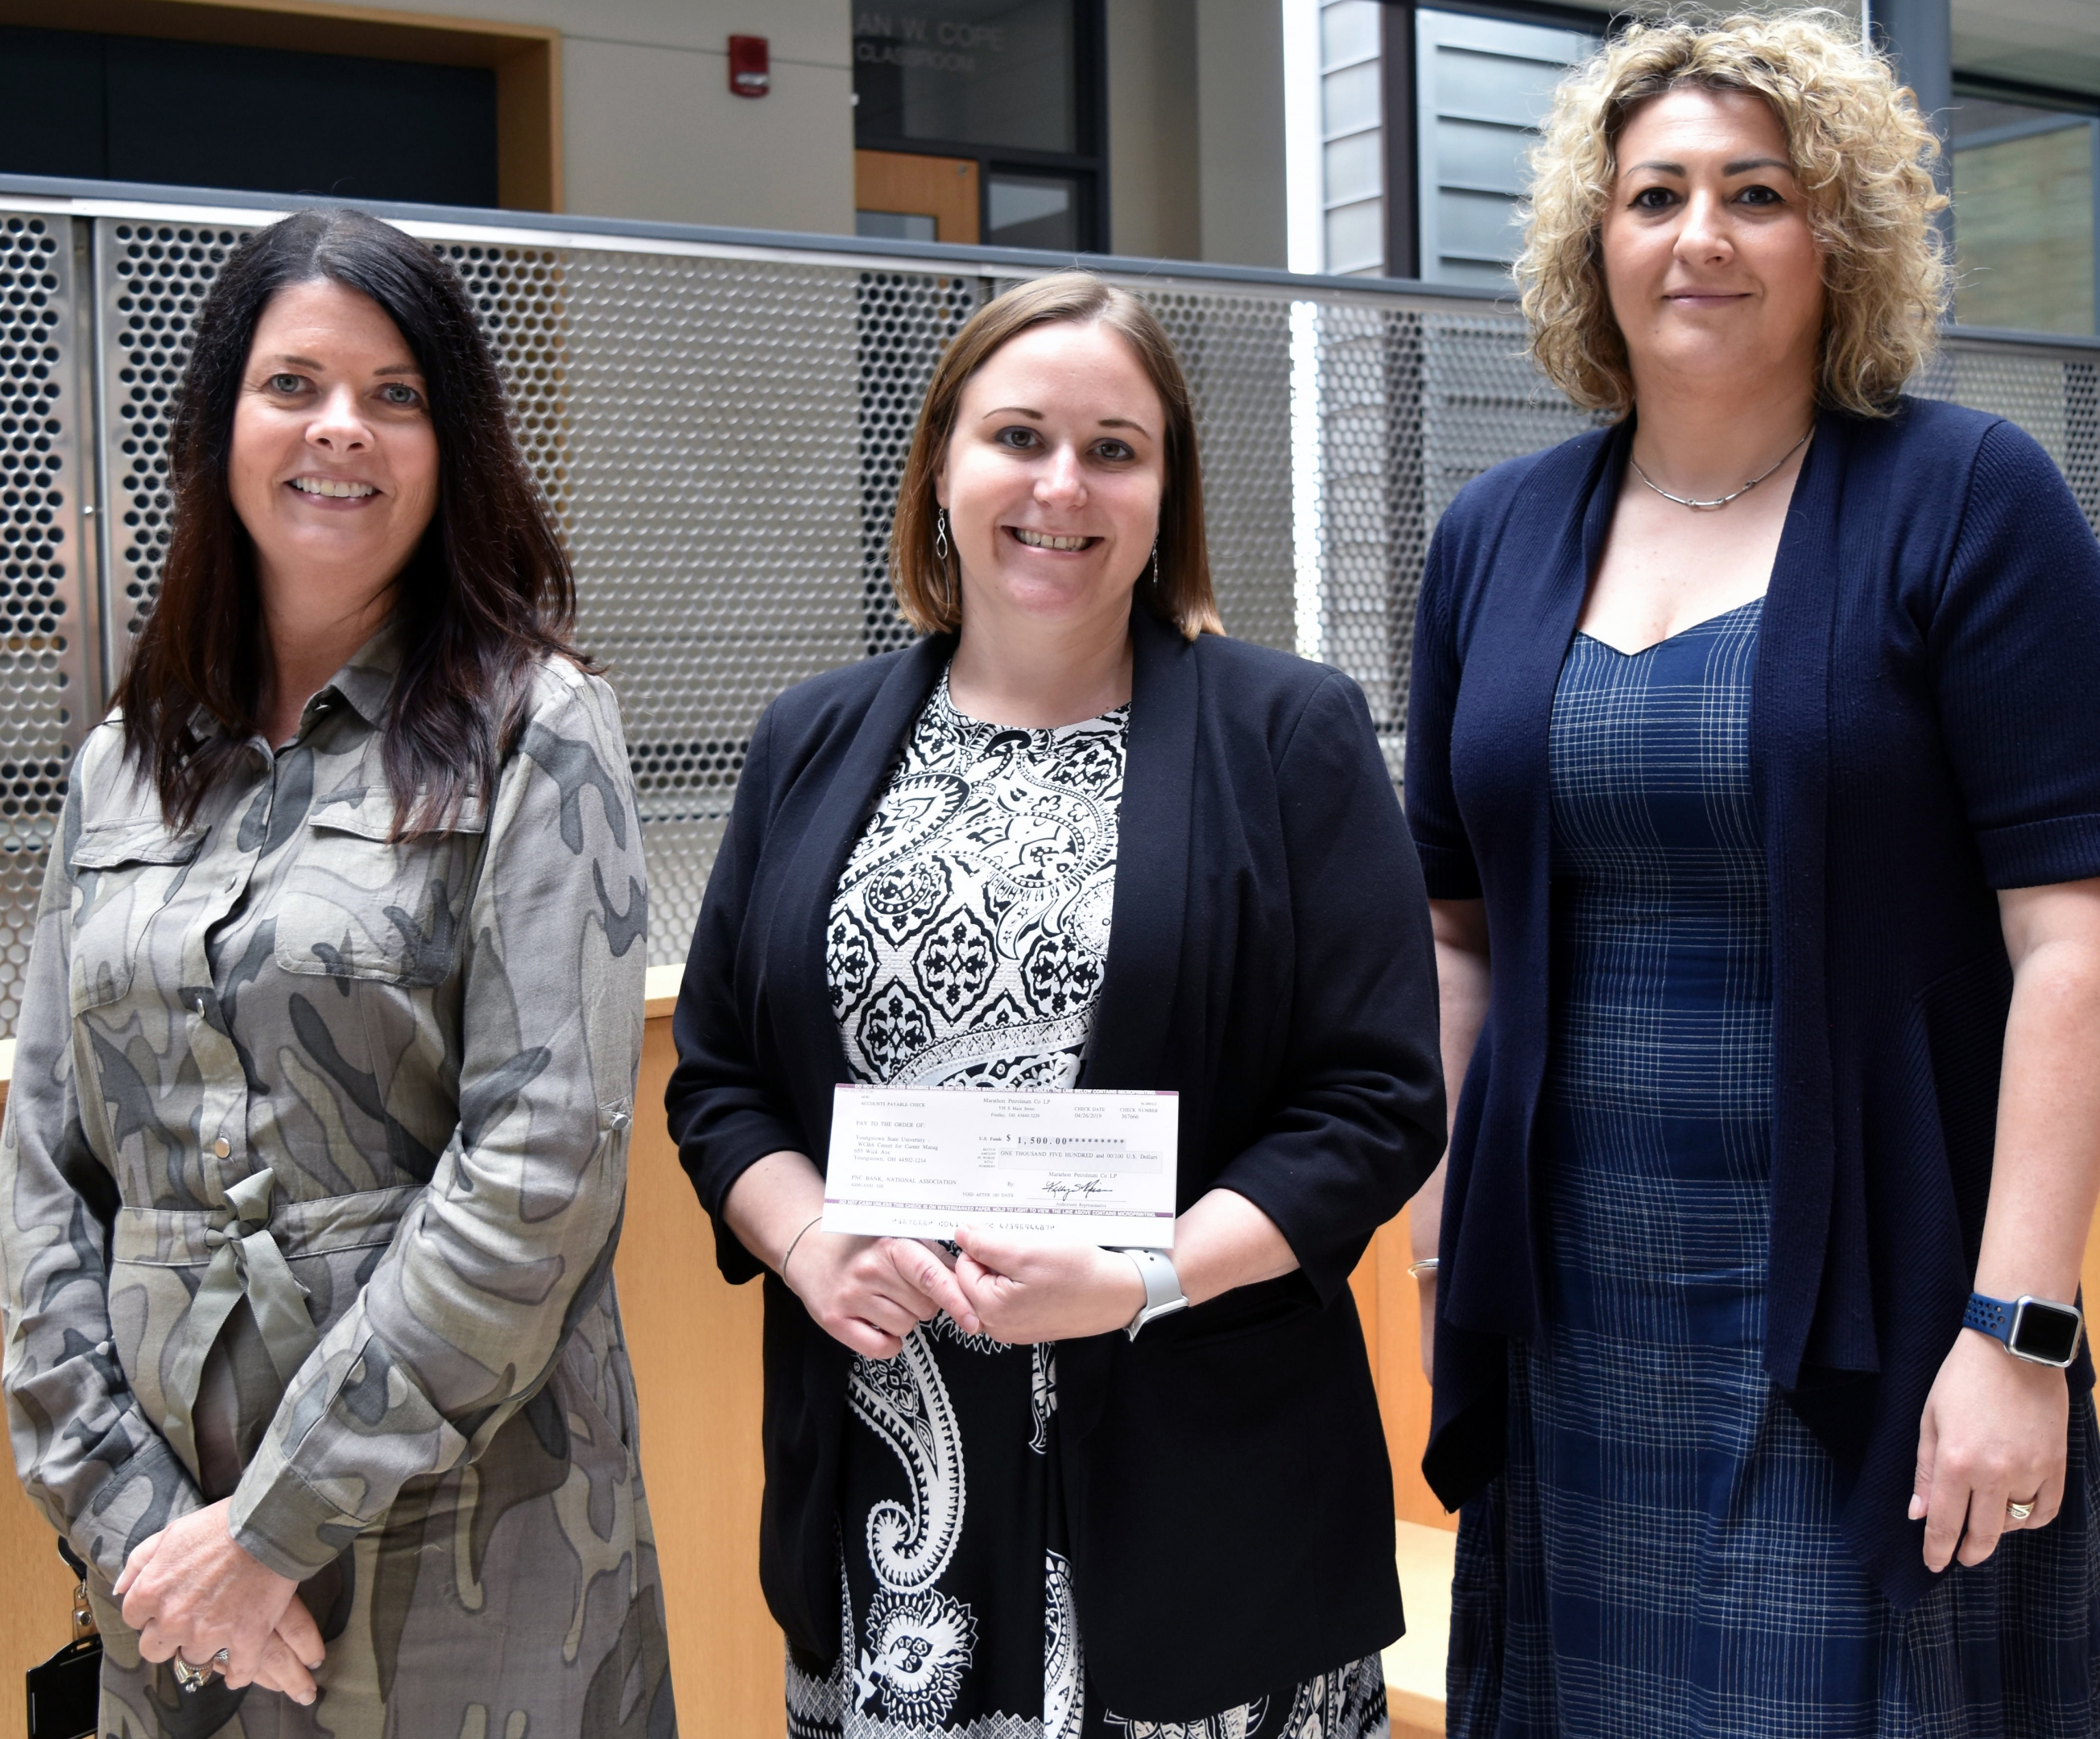 Valerie Luther, region administrative assistant of Speedway, left, and Lejla Sehic, advance human resources advisor at Speedway, right, present a $1,500 check to Christina O’Connell, director of the Center for Career Management in the Williamson College of Business Administration at YSU.